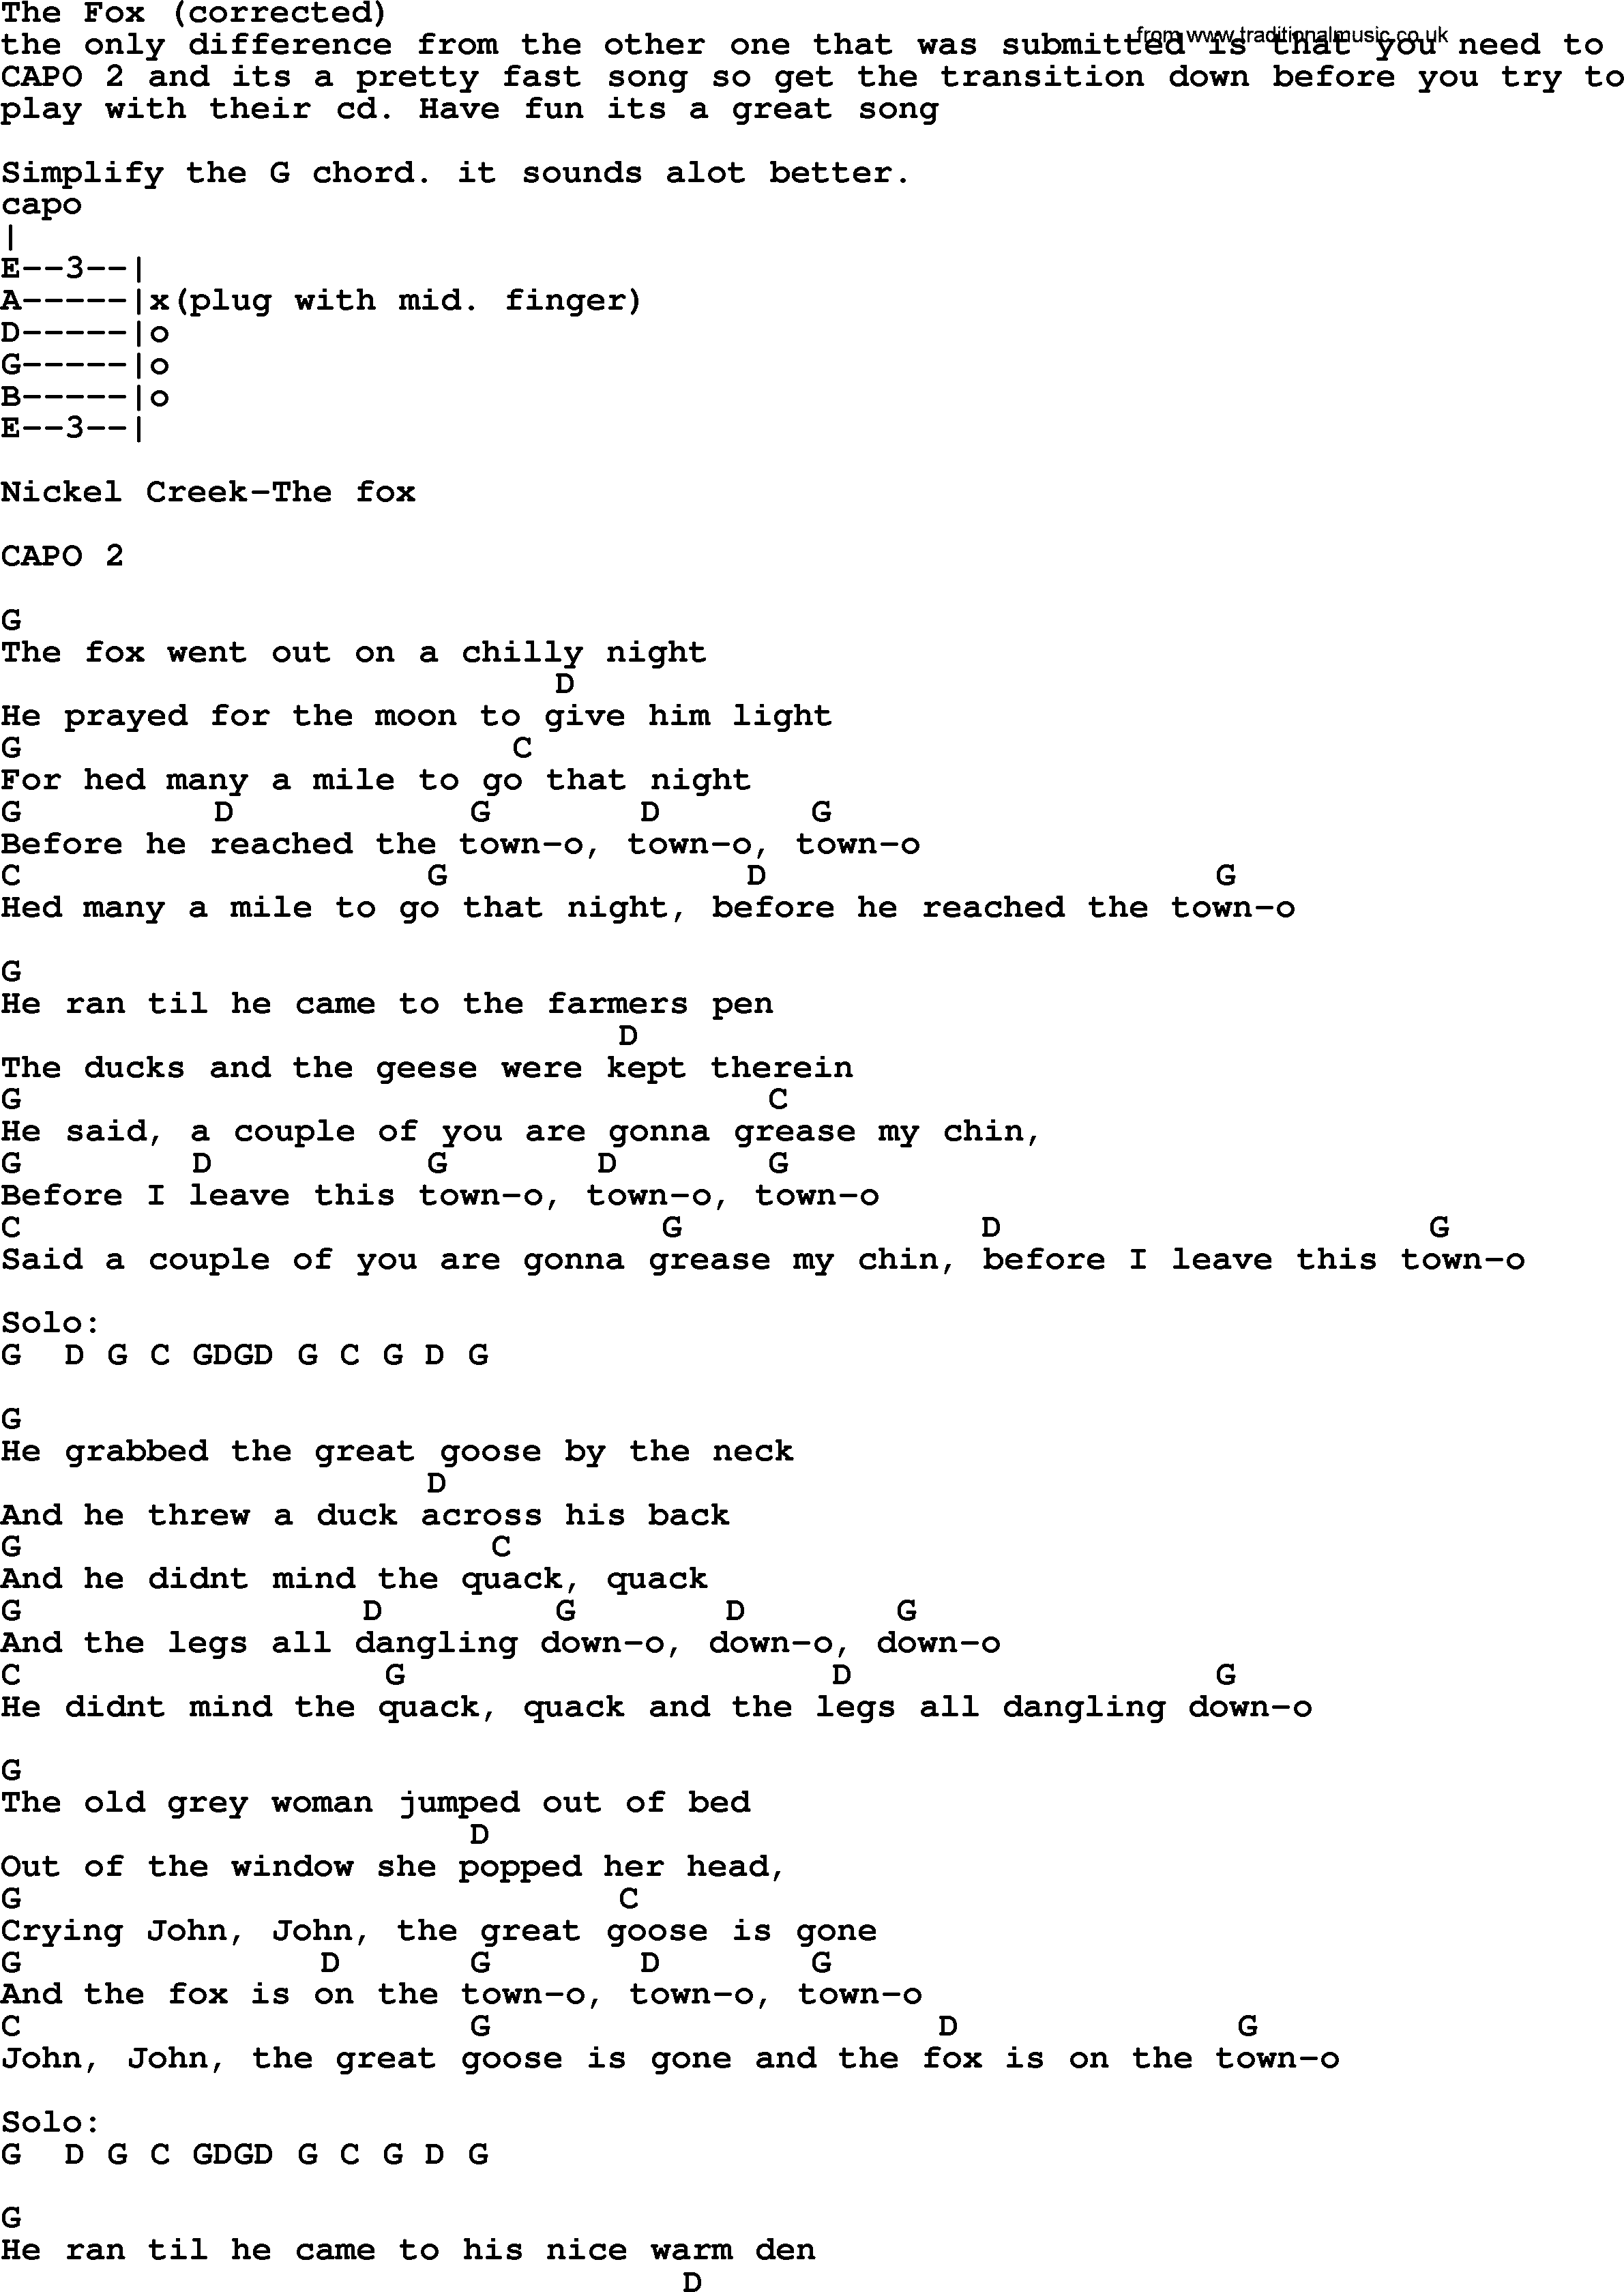 Bluegrass song: The Fox (Corrected), lyrics and chords